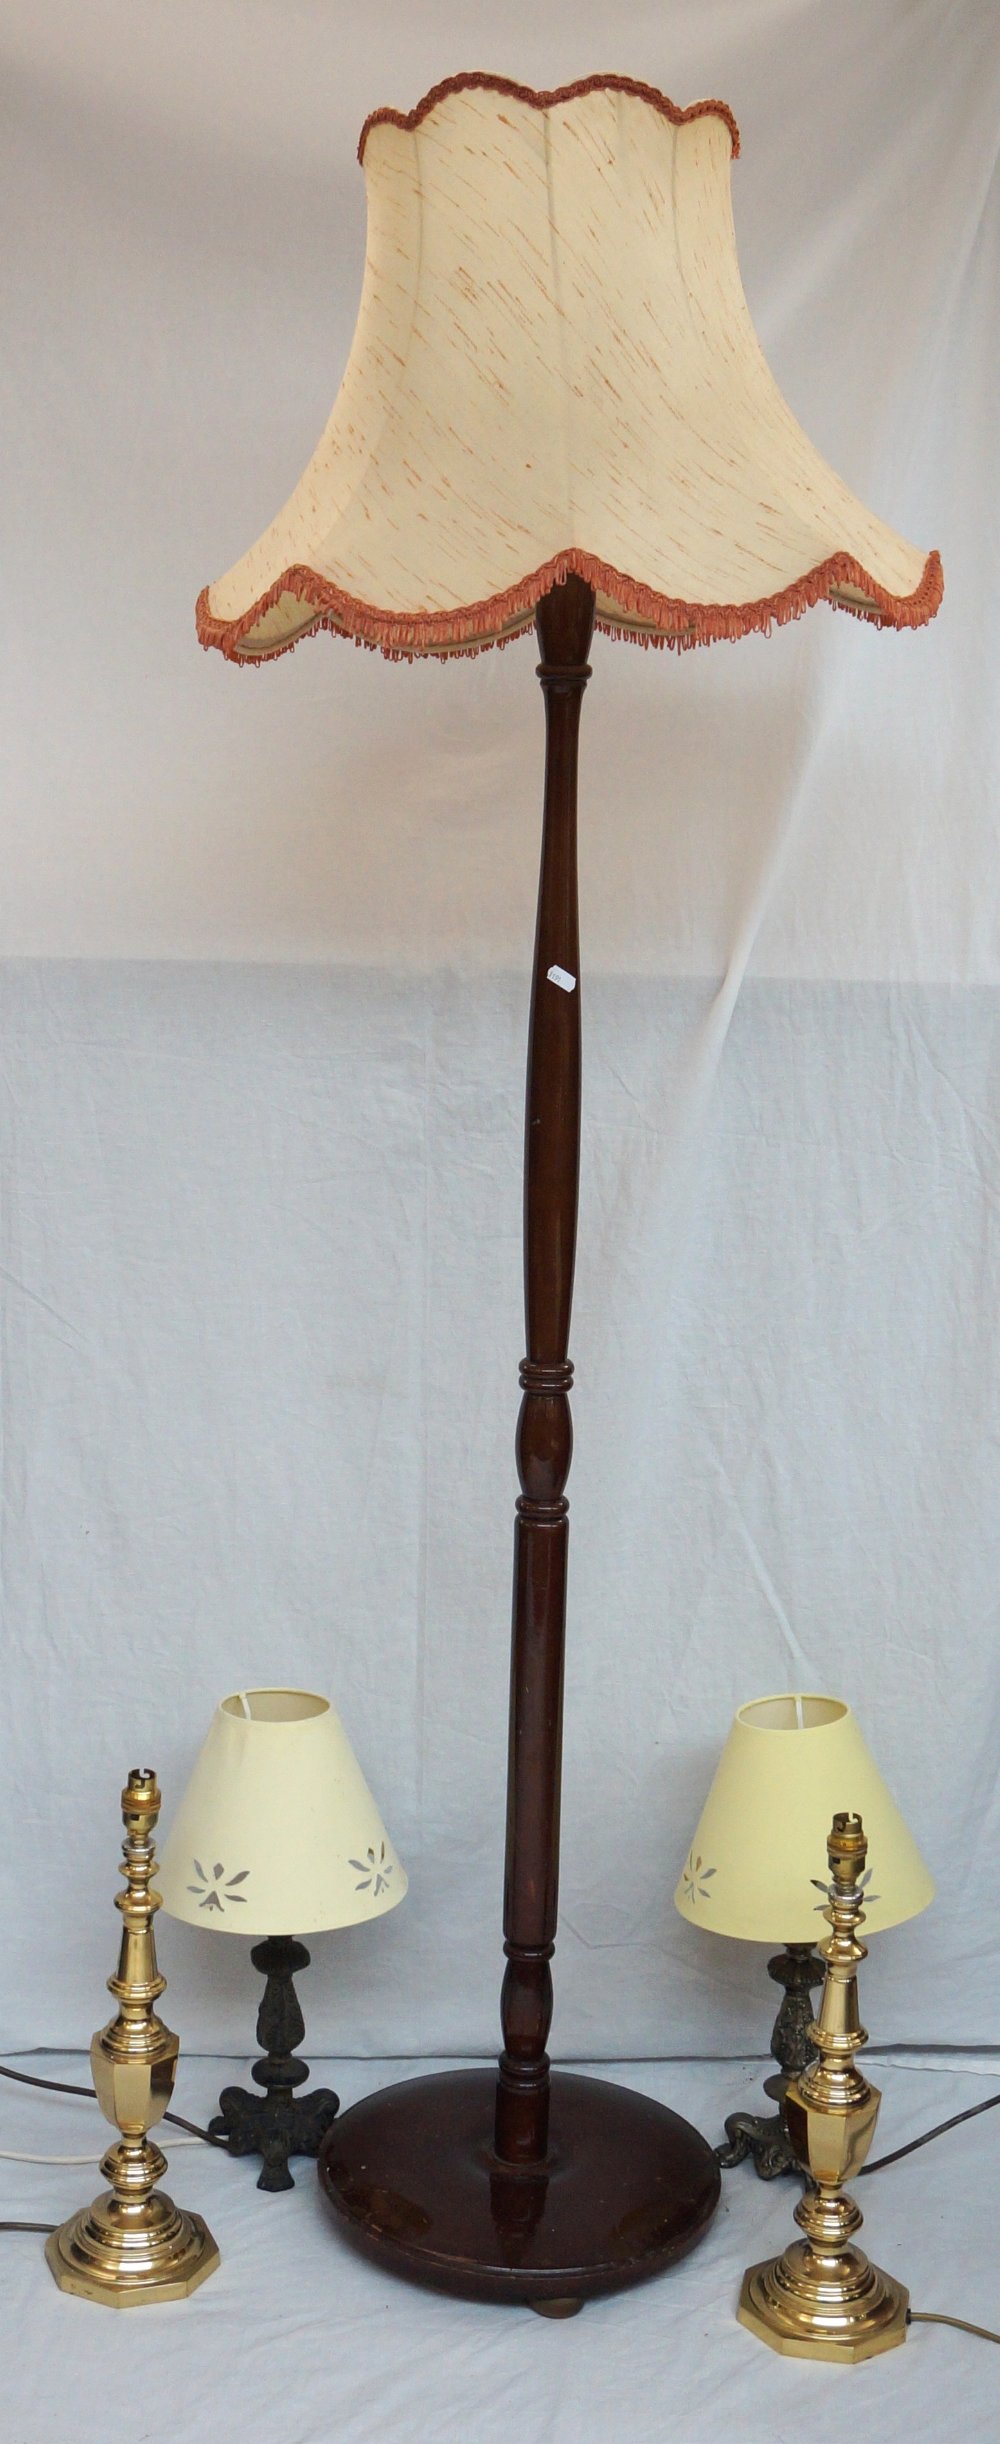 PAIR OF BRASS LAMPS
of shaped form with shades, together with a pair of gilded table lamps on tripod